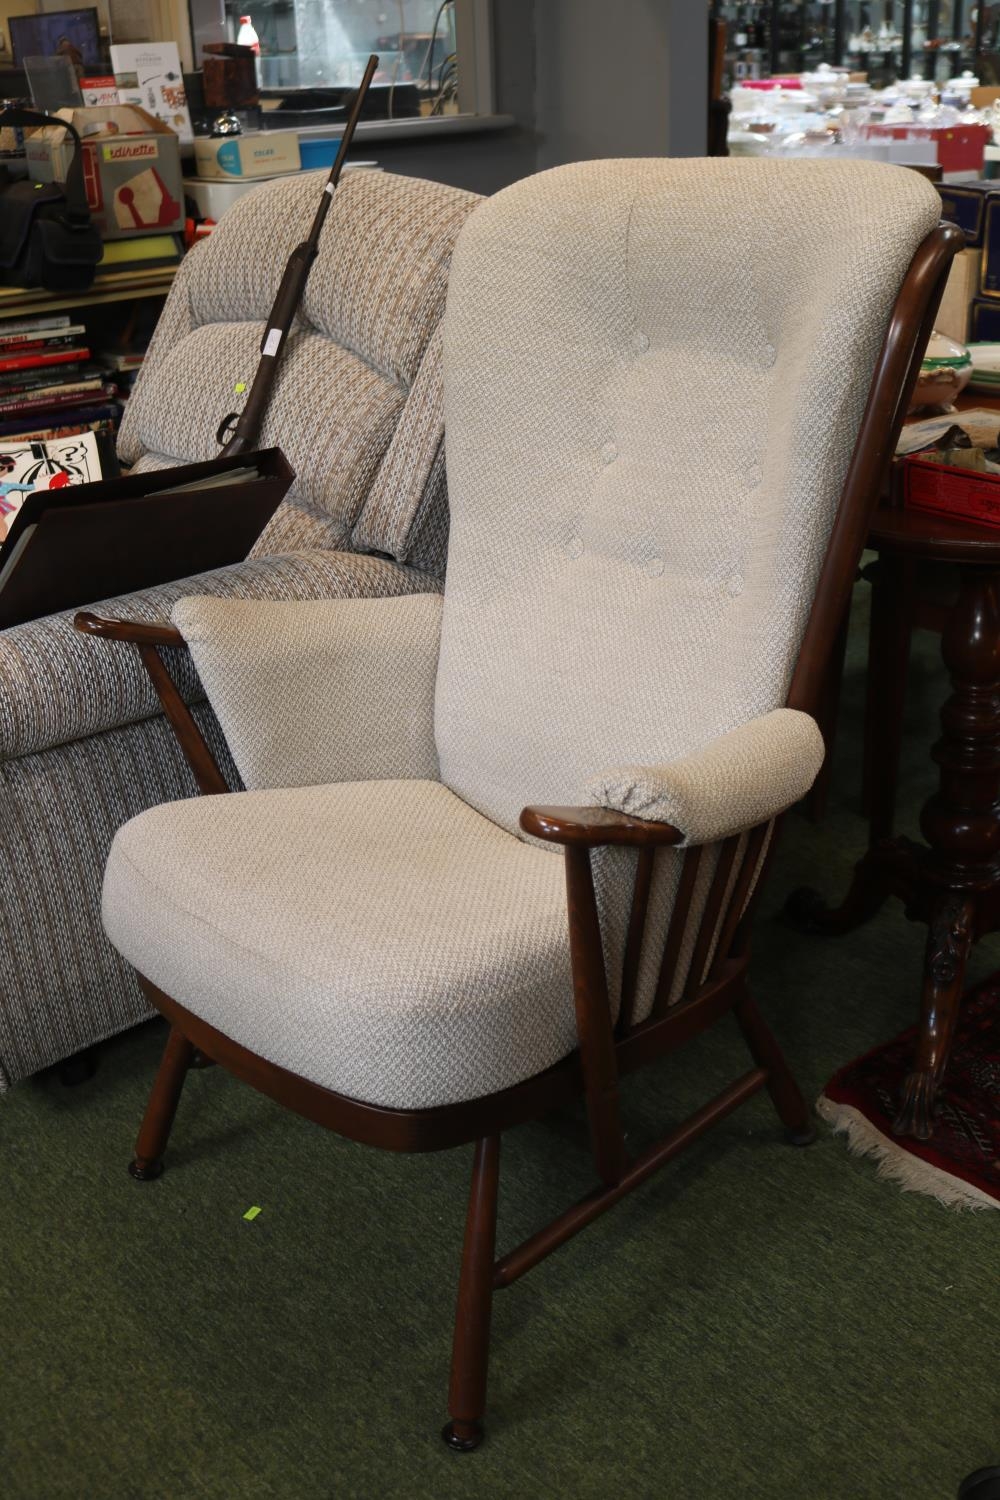 Ercol Spoon back Elbow chair with upholstered seat and back